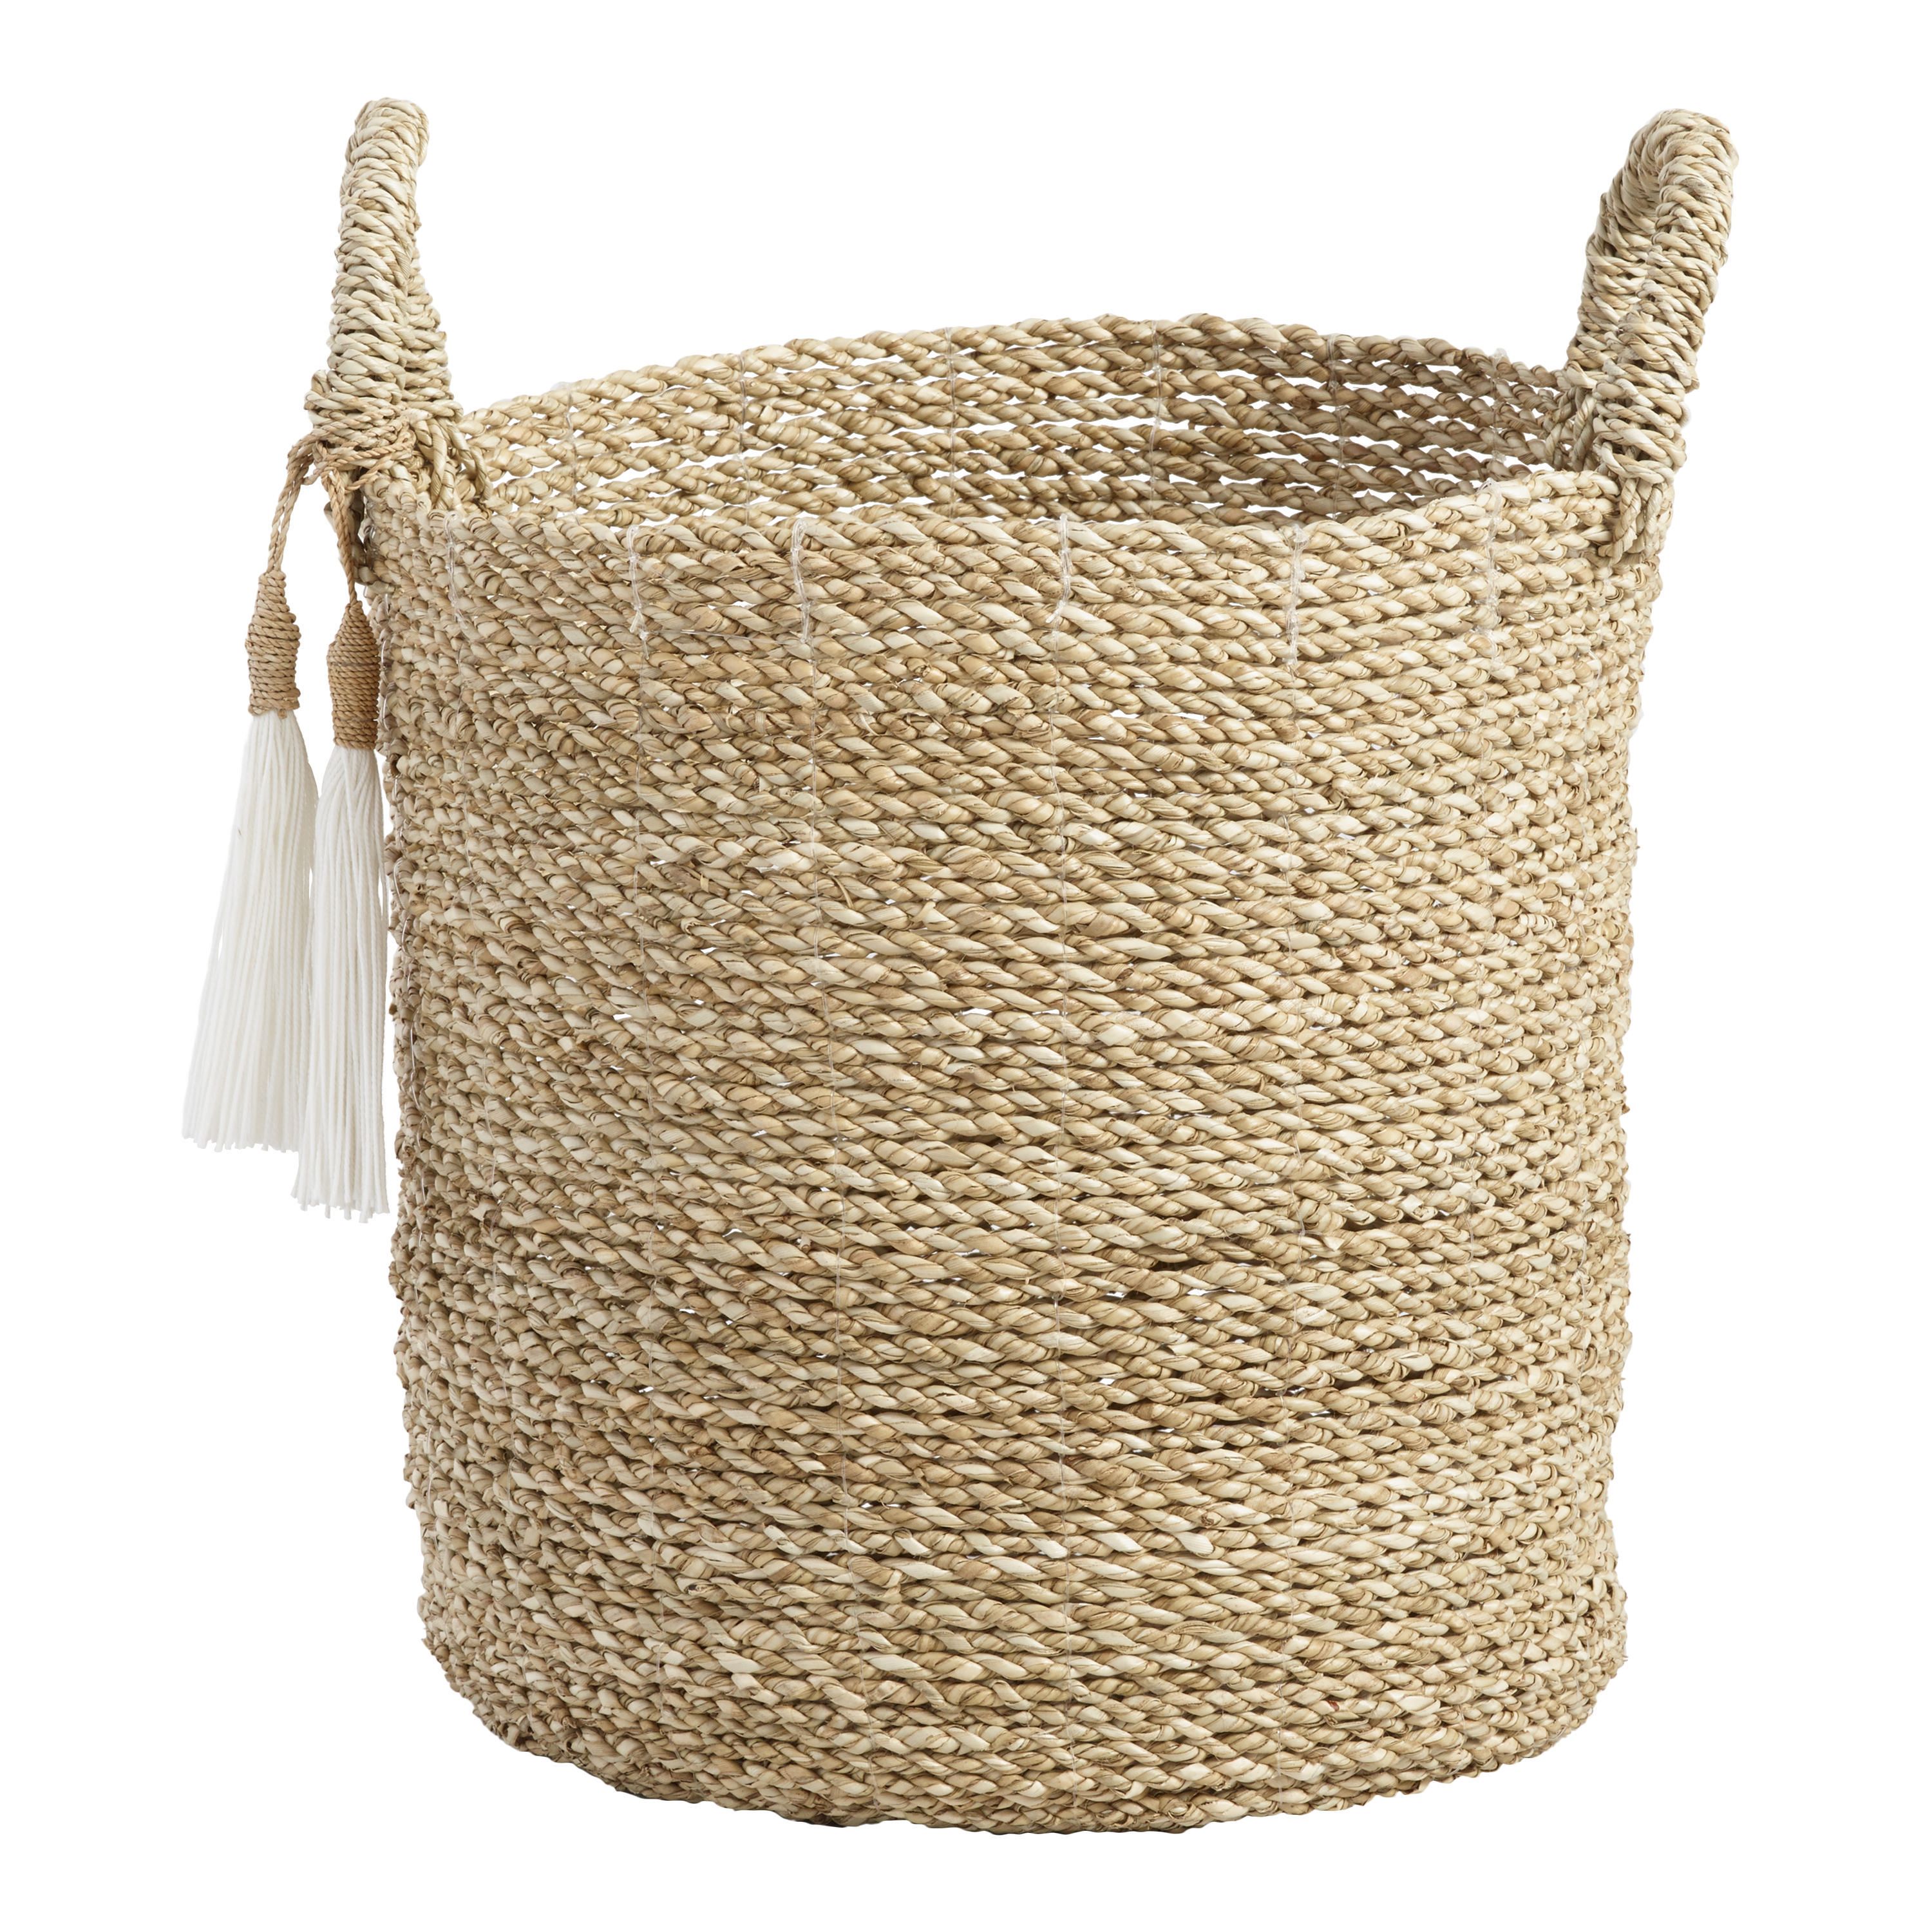 Delilah Seagrass Tote Basket With Tassels | World Market